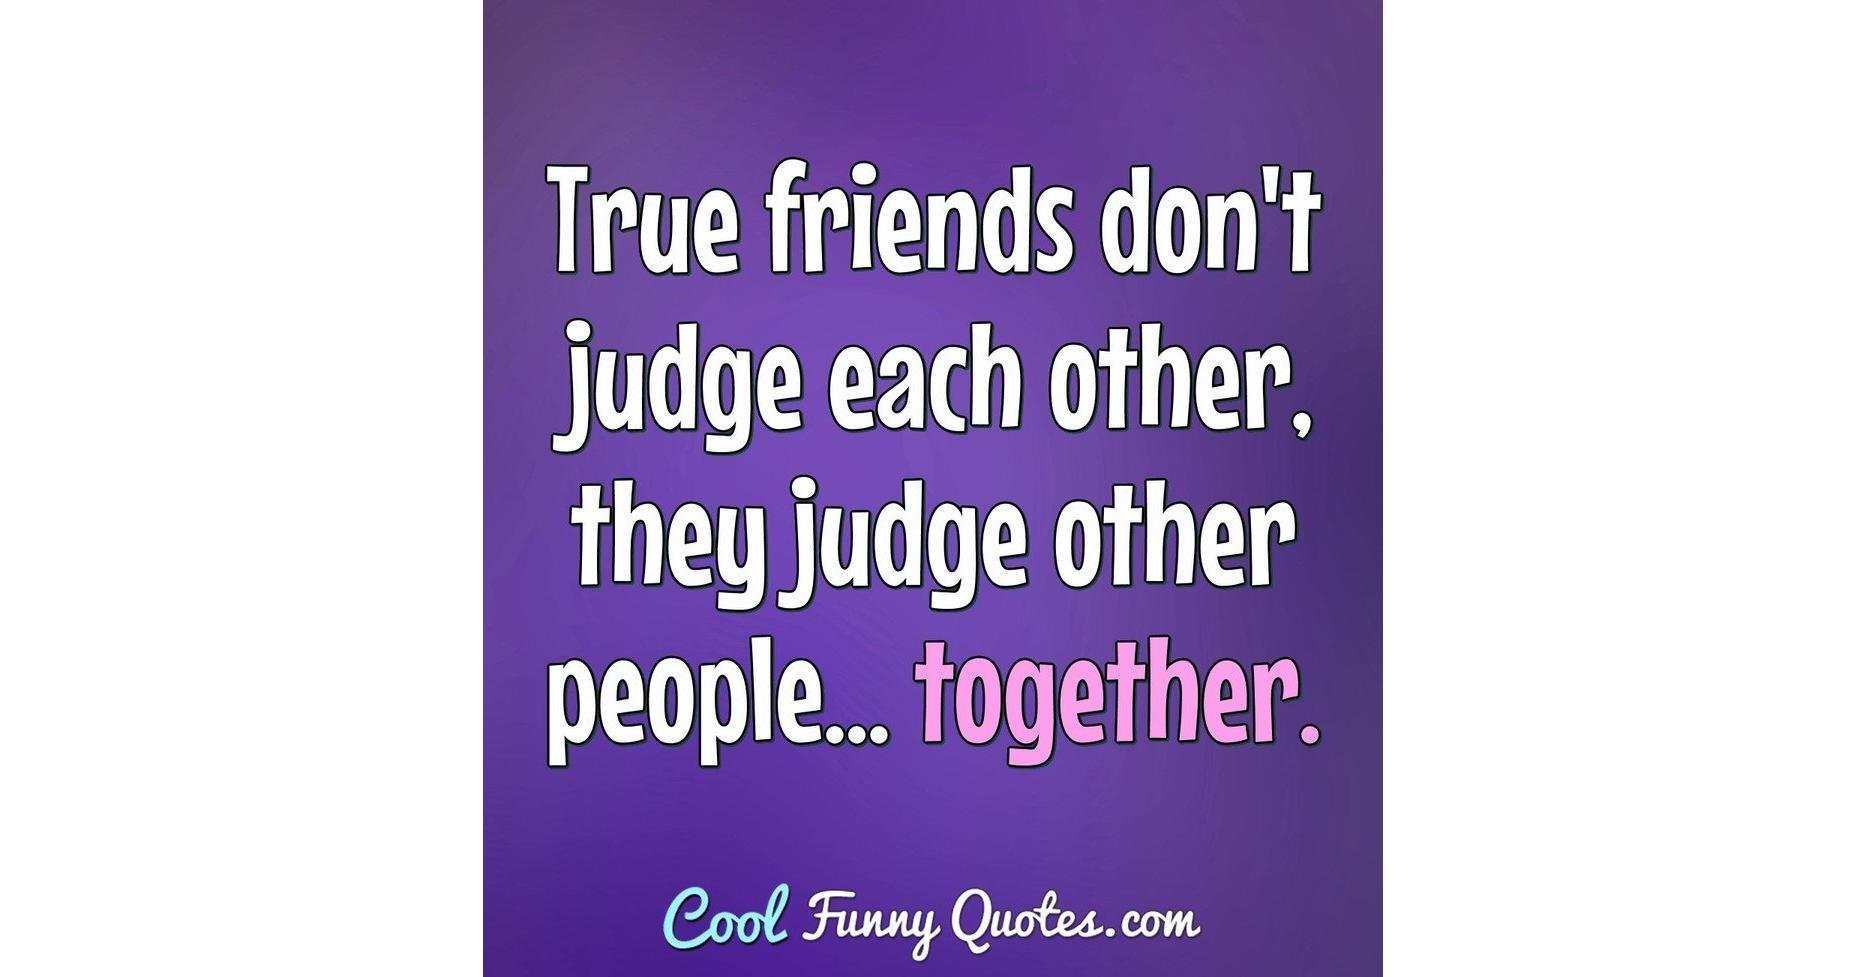 True friends don't judge each other, they judge other people... together.